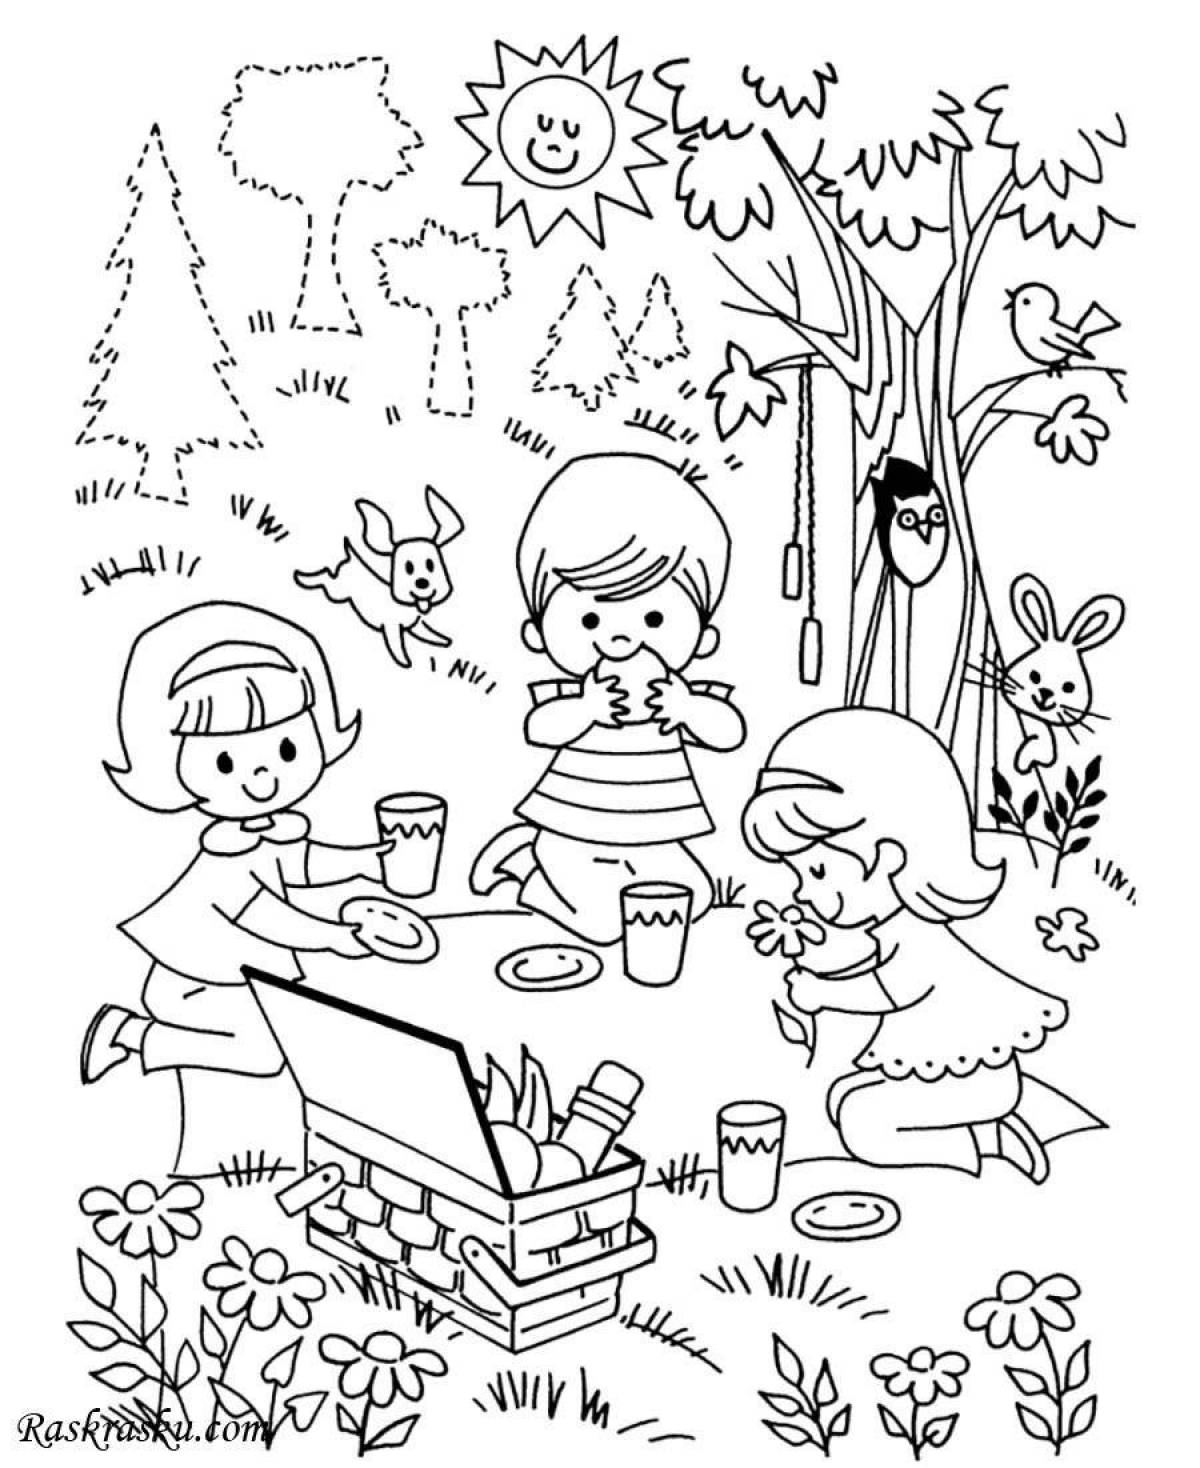 Awesome coloring pages